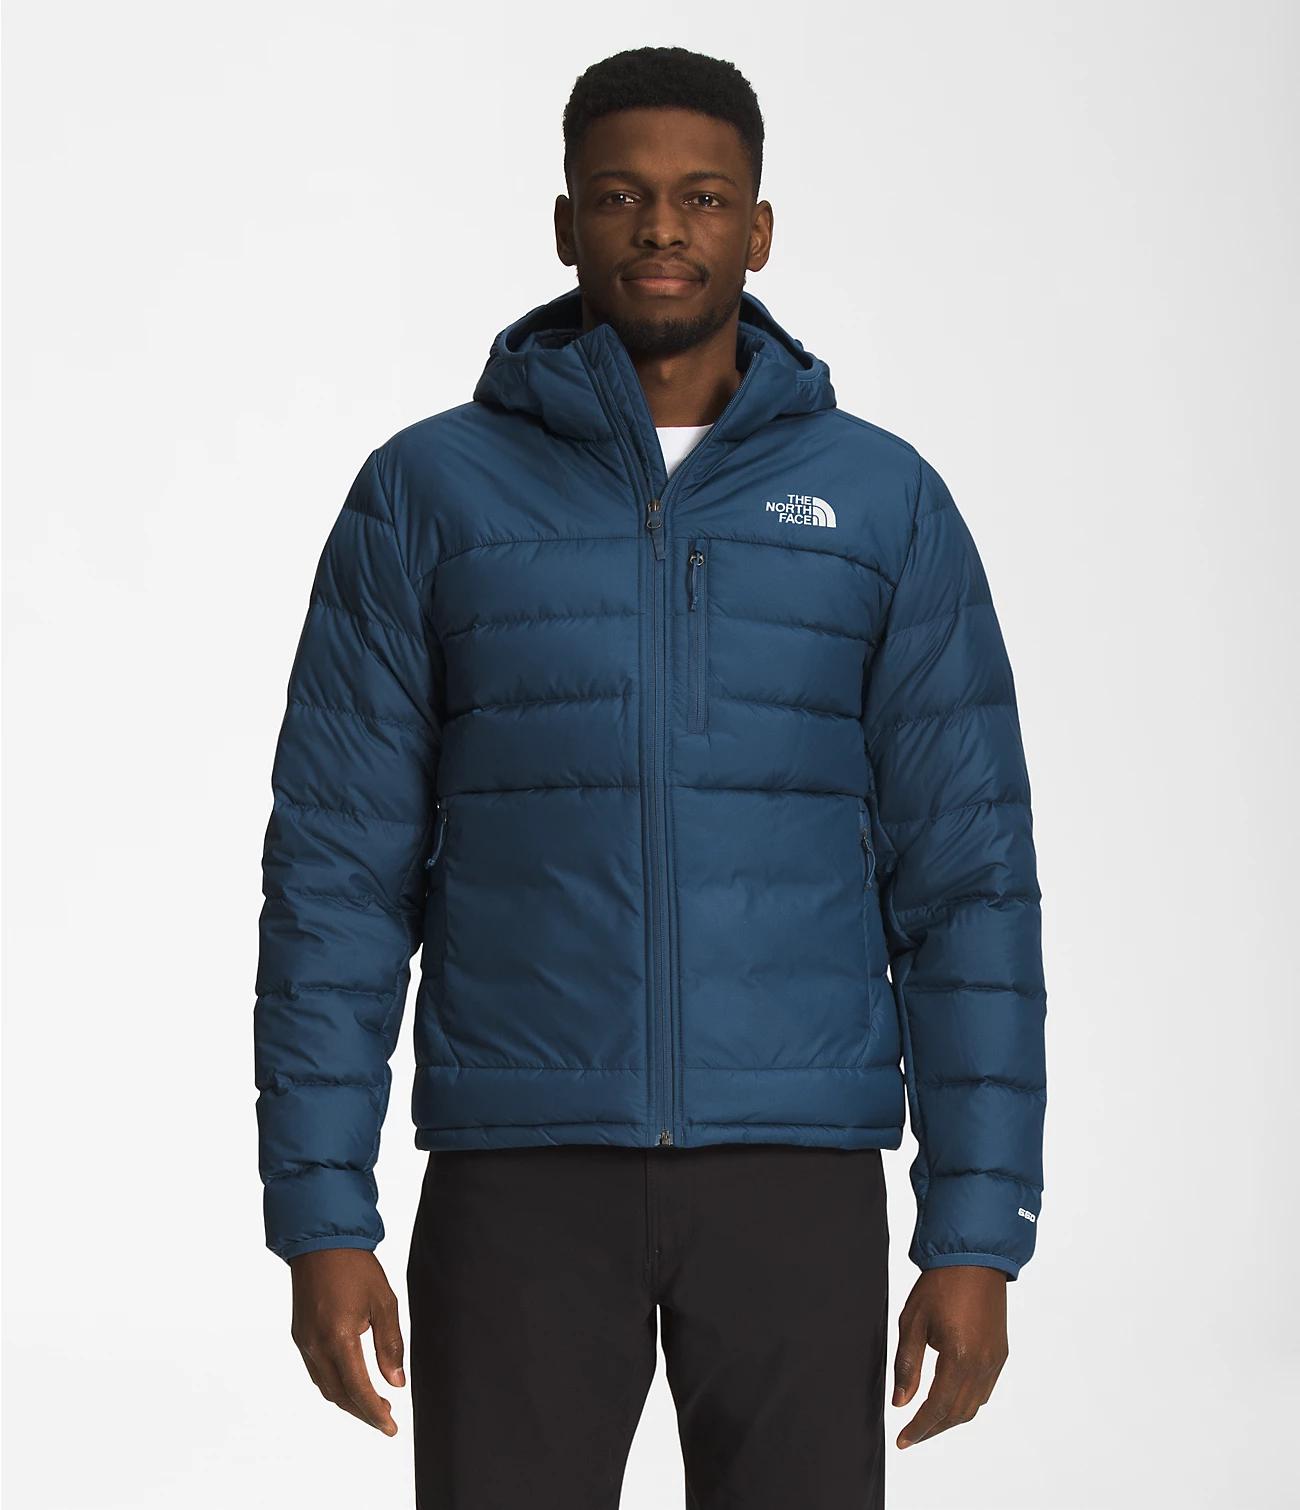 Men’s Summit Series Breithorn Hoodie by THE NORTH FACE | jellibeans